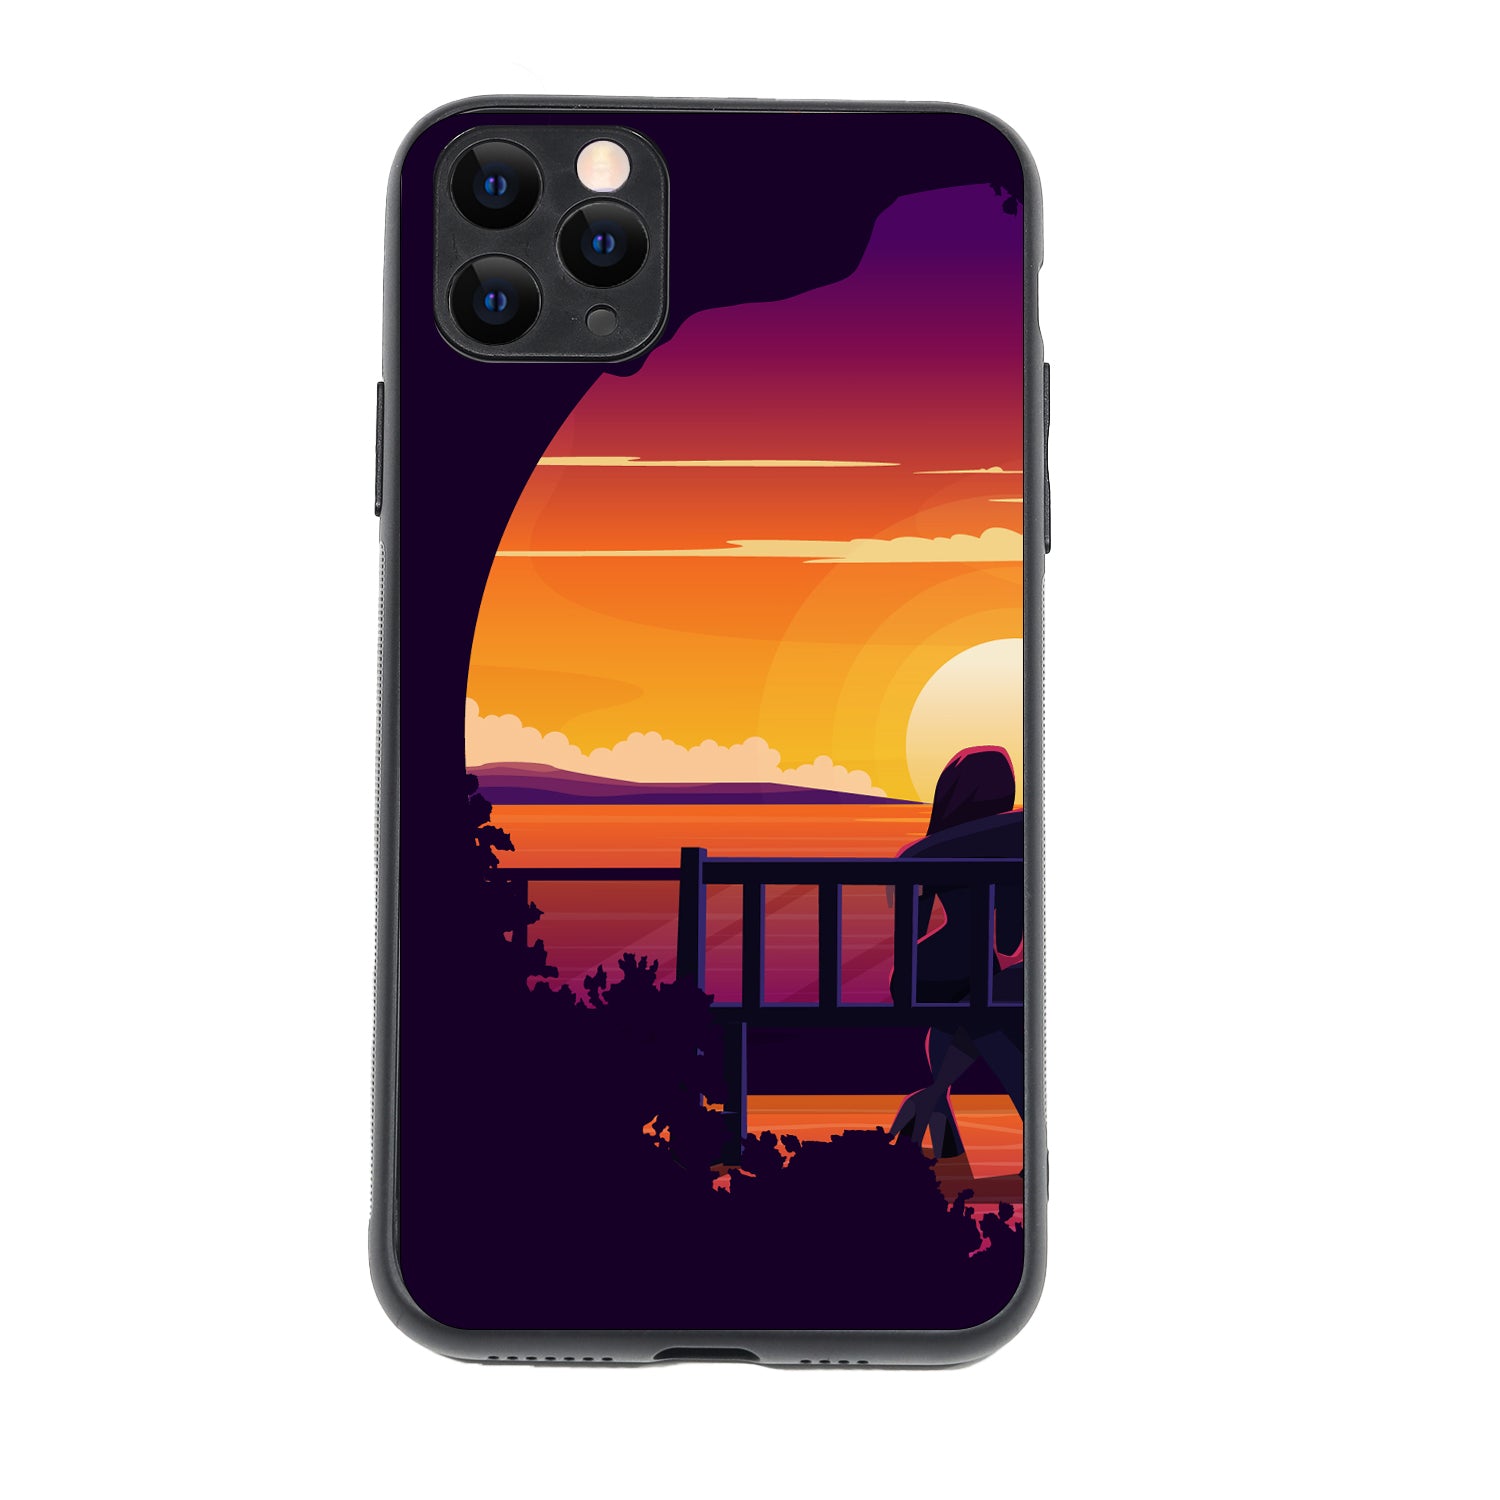 Sunset Date Girl Couple iPhone 11 Pro Max Case